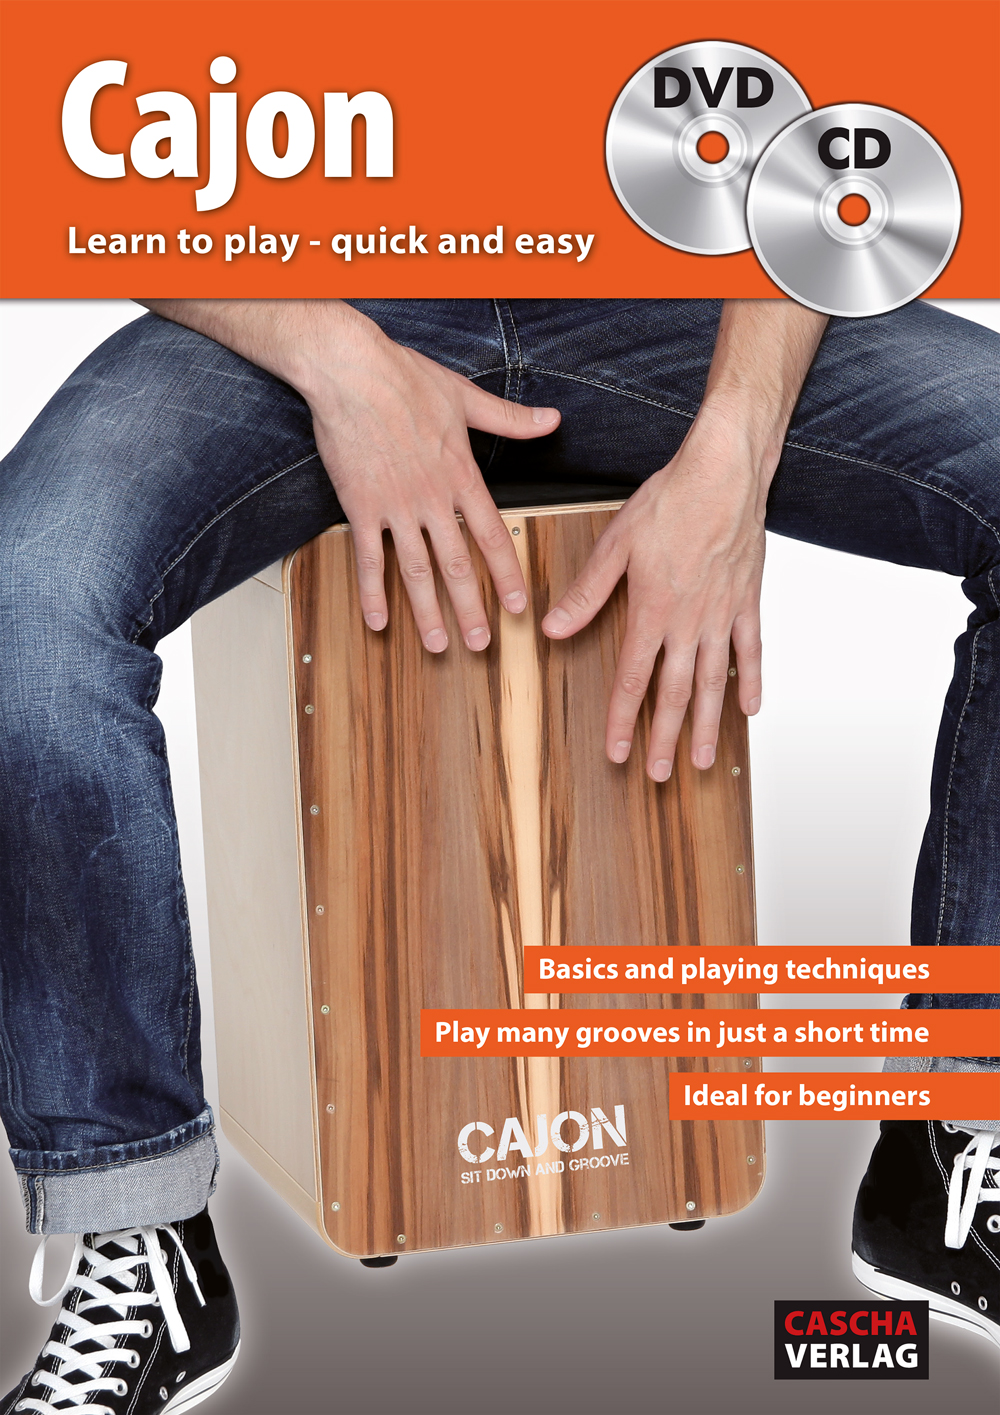 CASCHA Cajon Box Natur Set with Backpack and Cajon School with CD and DVD for Beginners Snare Sound